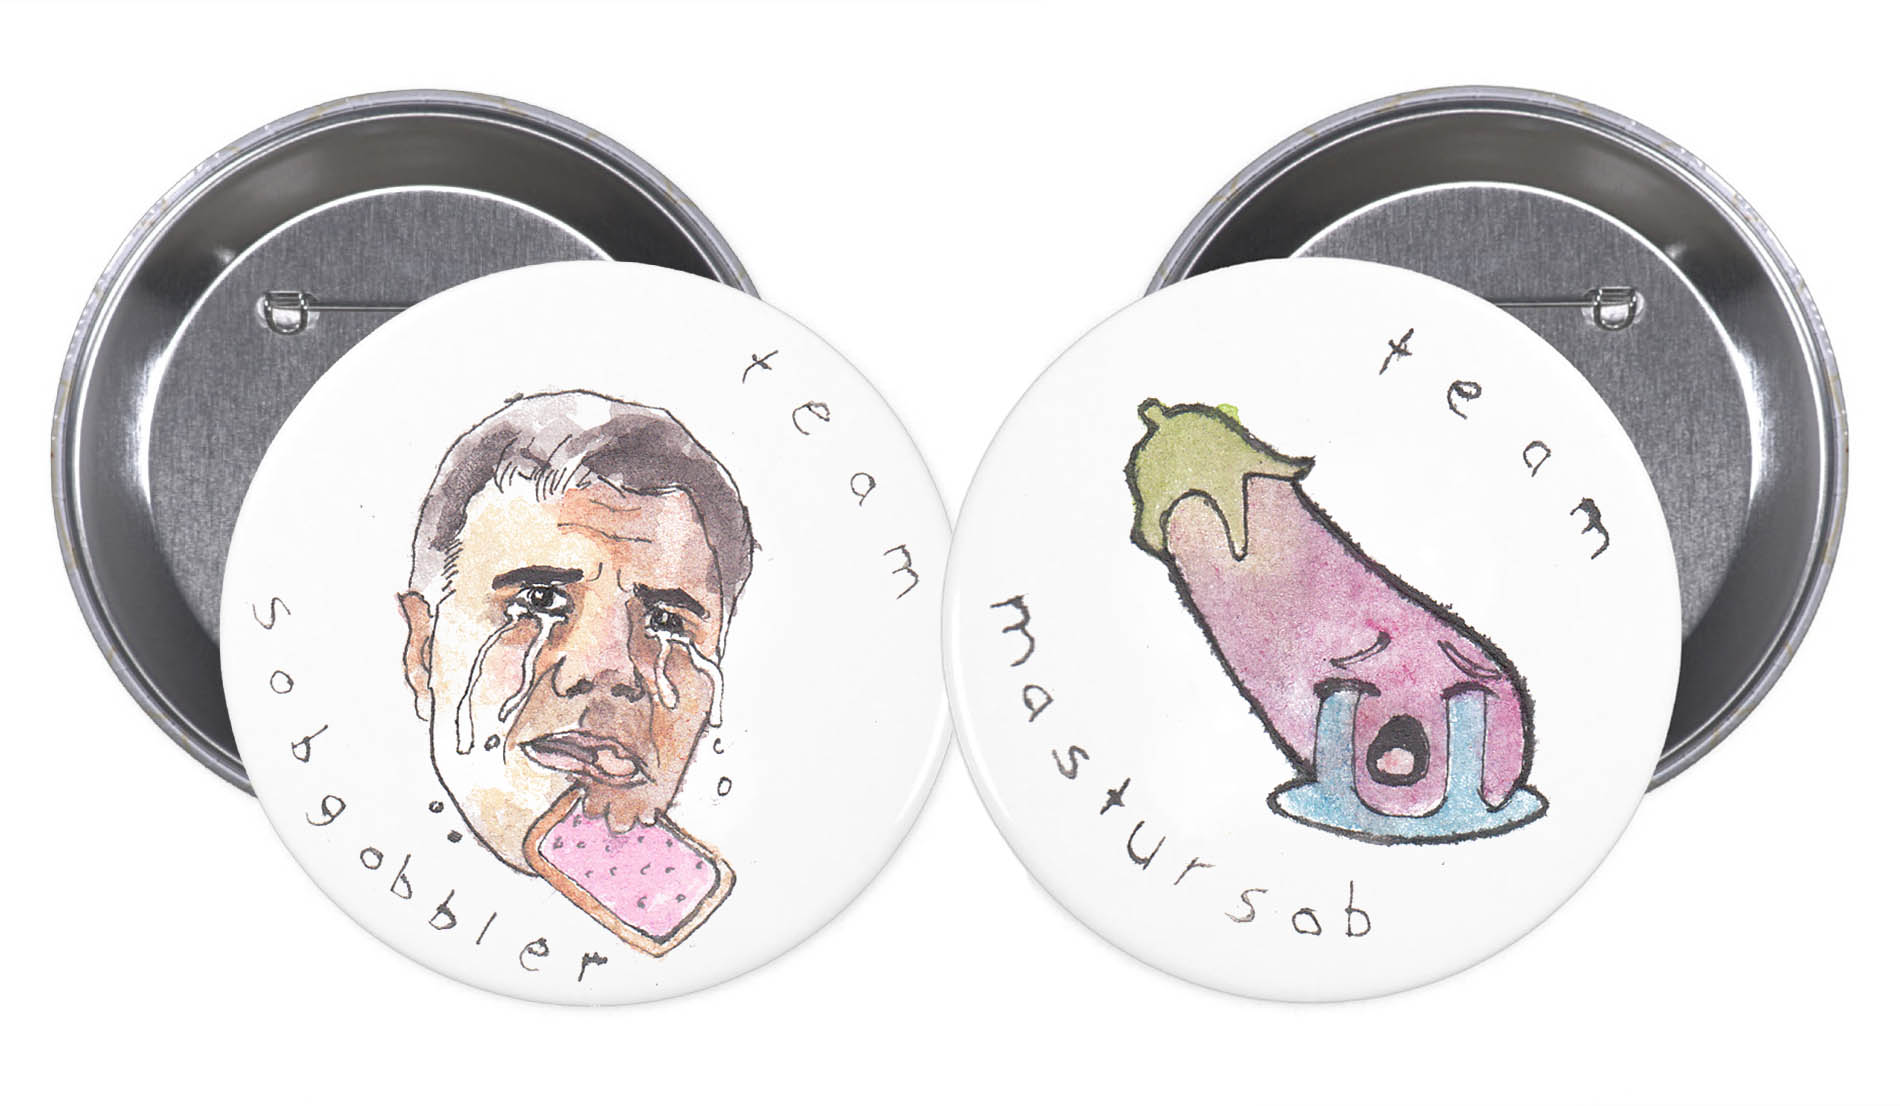 Buttons for team mastersob and team sob gobbler